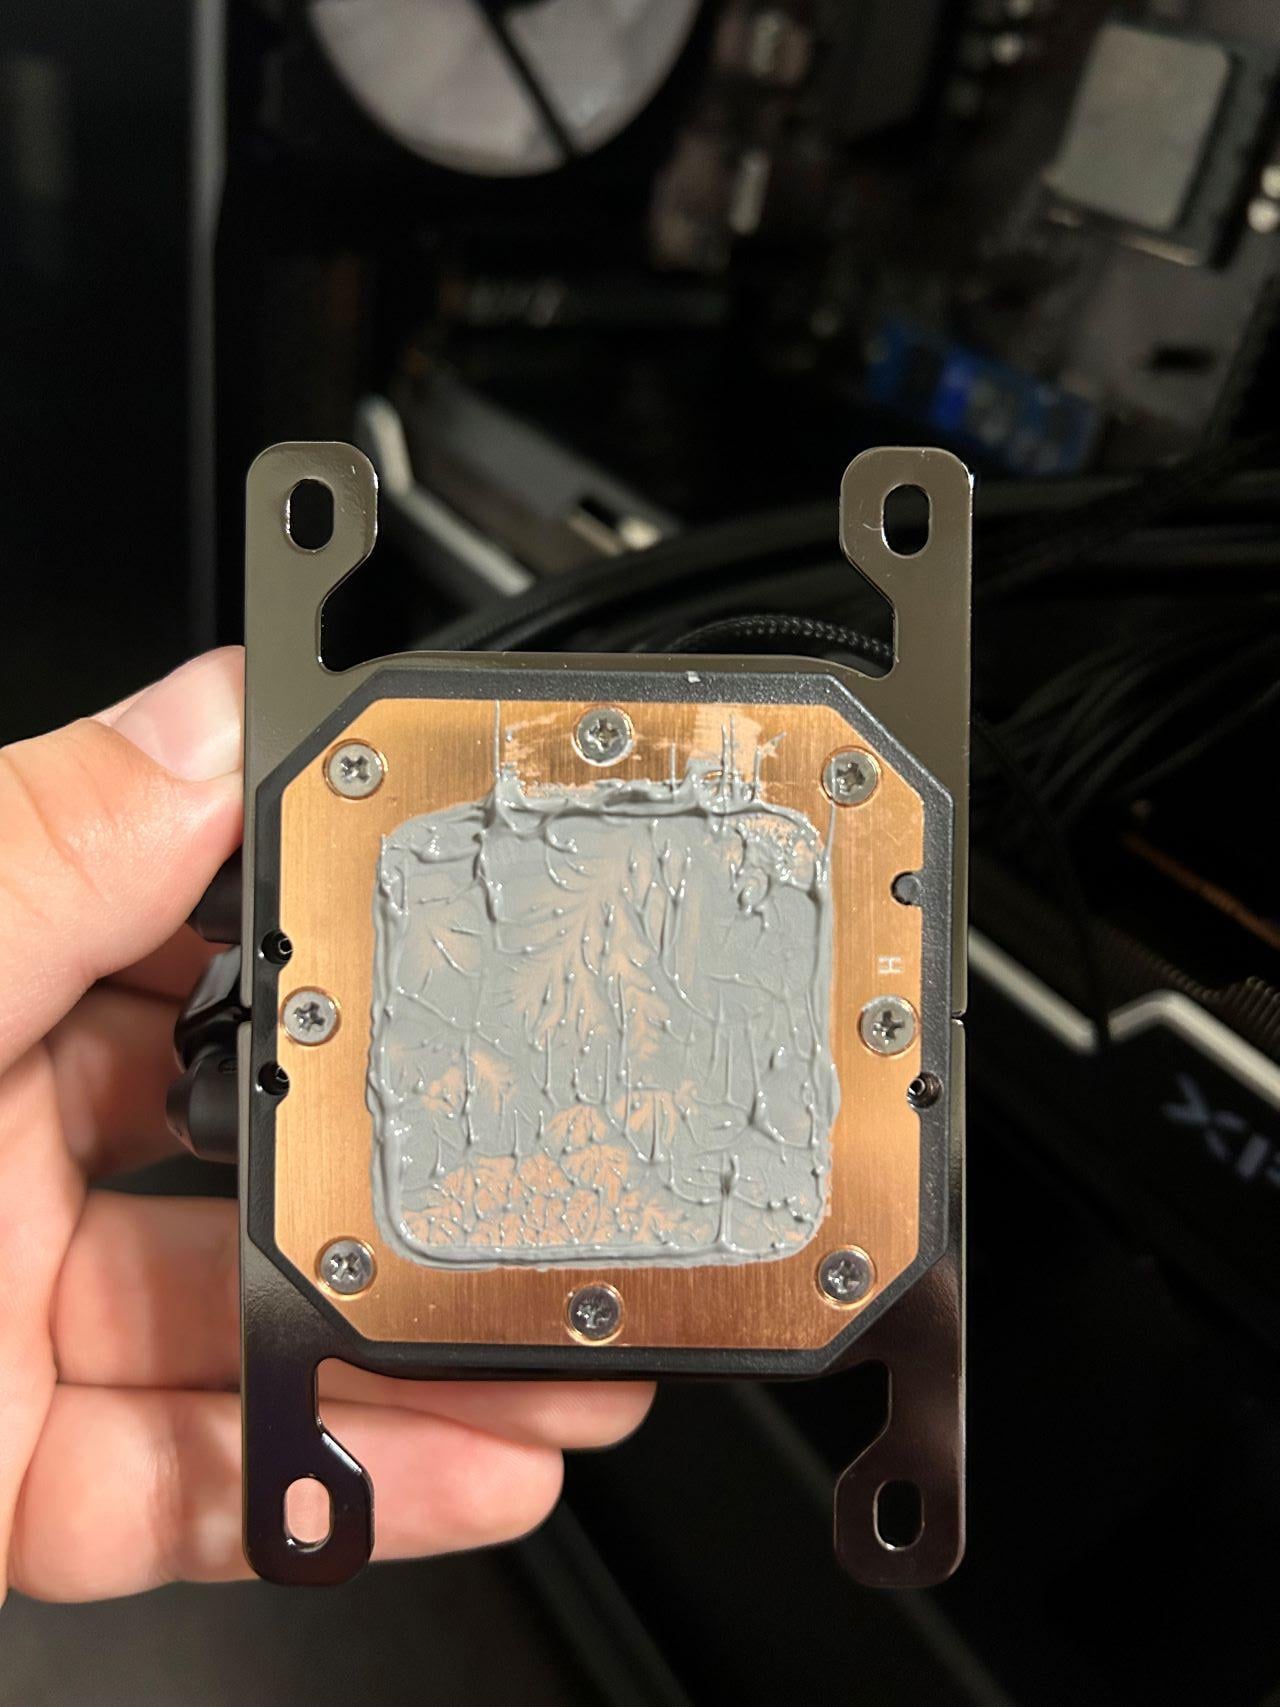 Ryzen 7 5800X3D heating quickly and ...